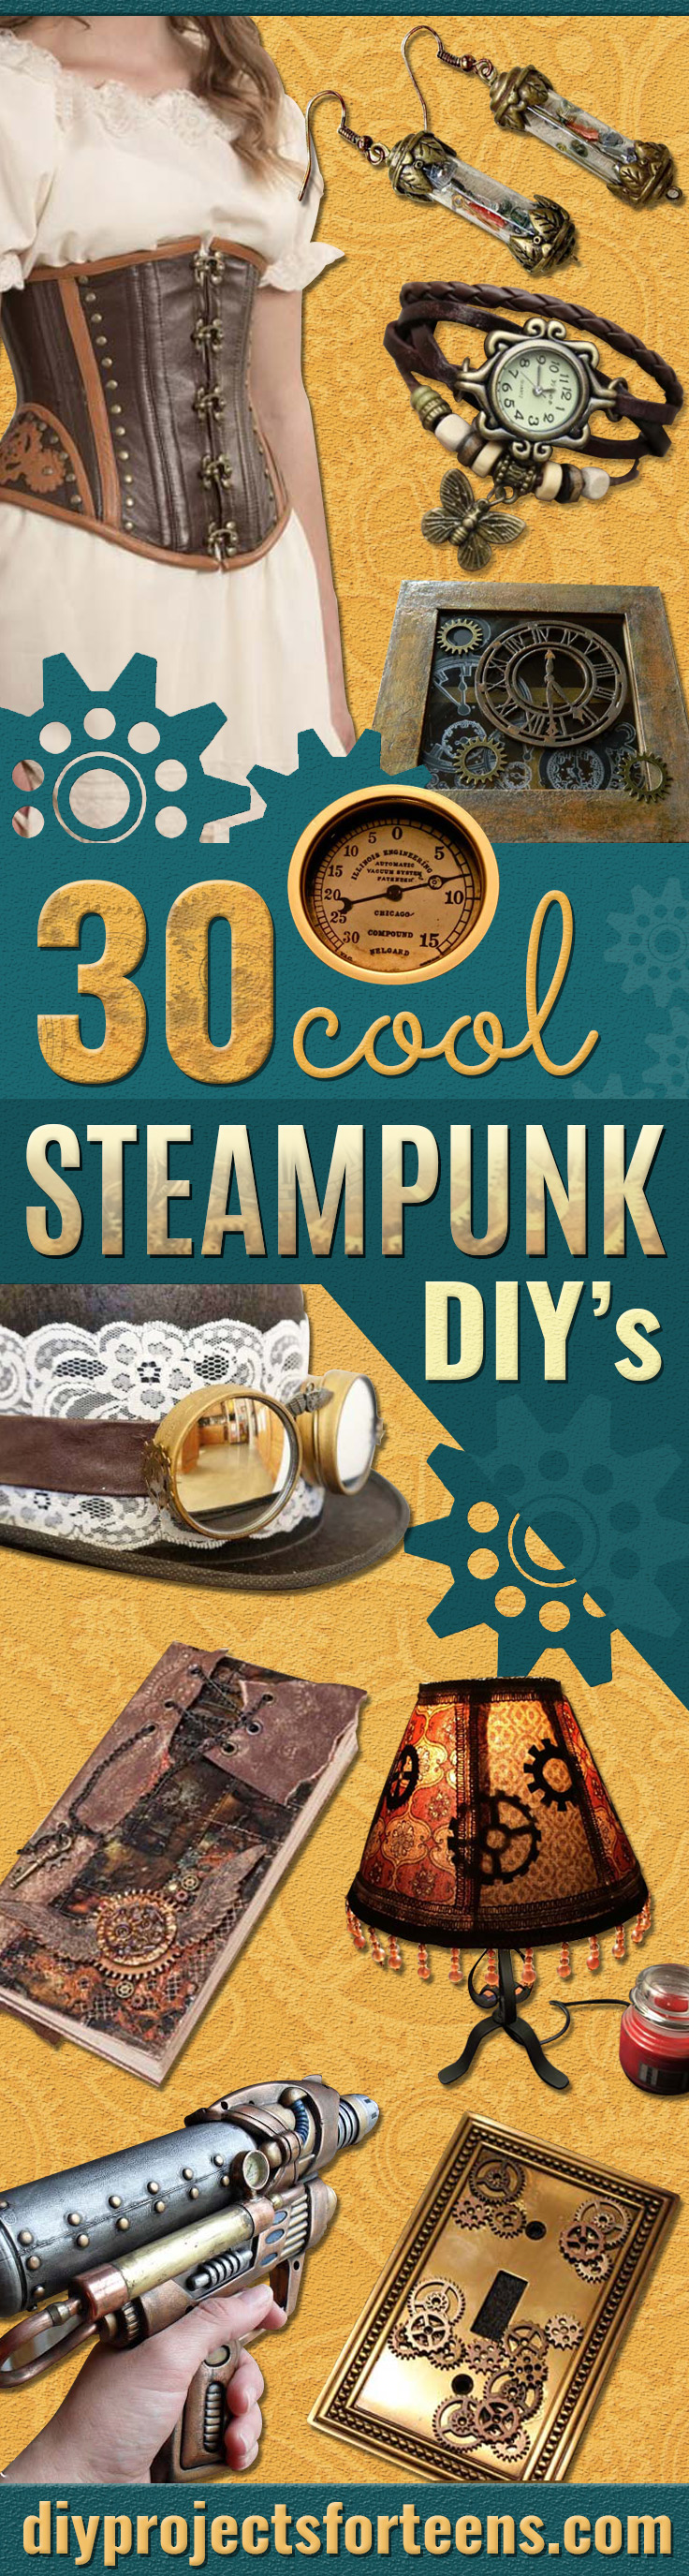 Cool Steampunk DIY Ideas - Easy Home Decor, Costume Ideas, Jewelry, Crafts, Furniture and Steampunk Fashion Tutorials - Clothes, Accessories and Best Step by Step Tutorials - Creative DIY Projects for Adults, Teens and Tweens